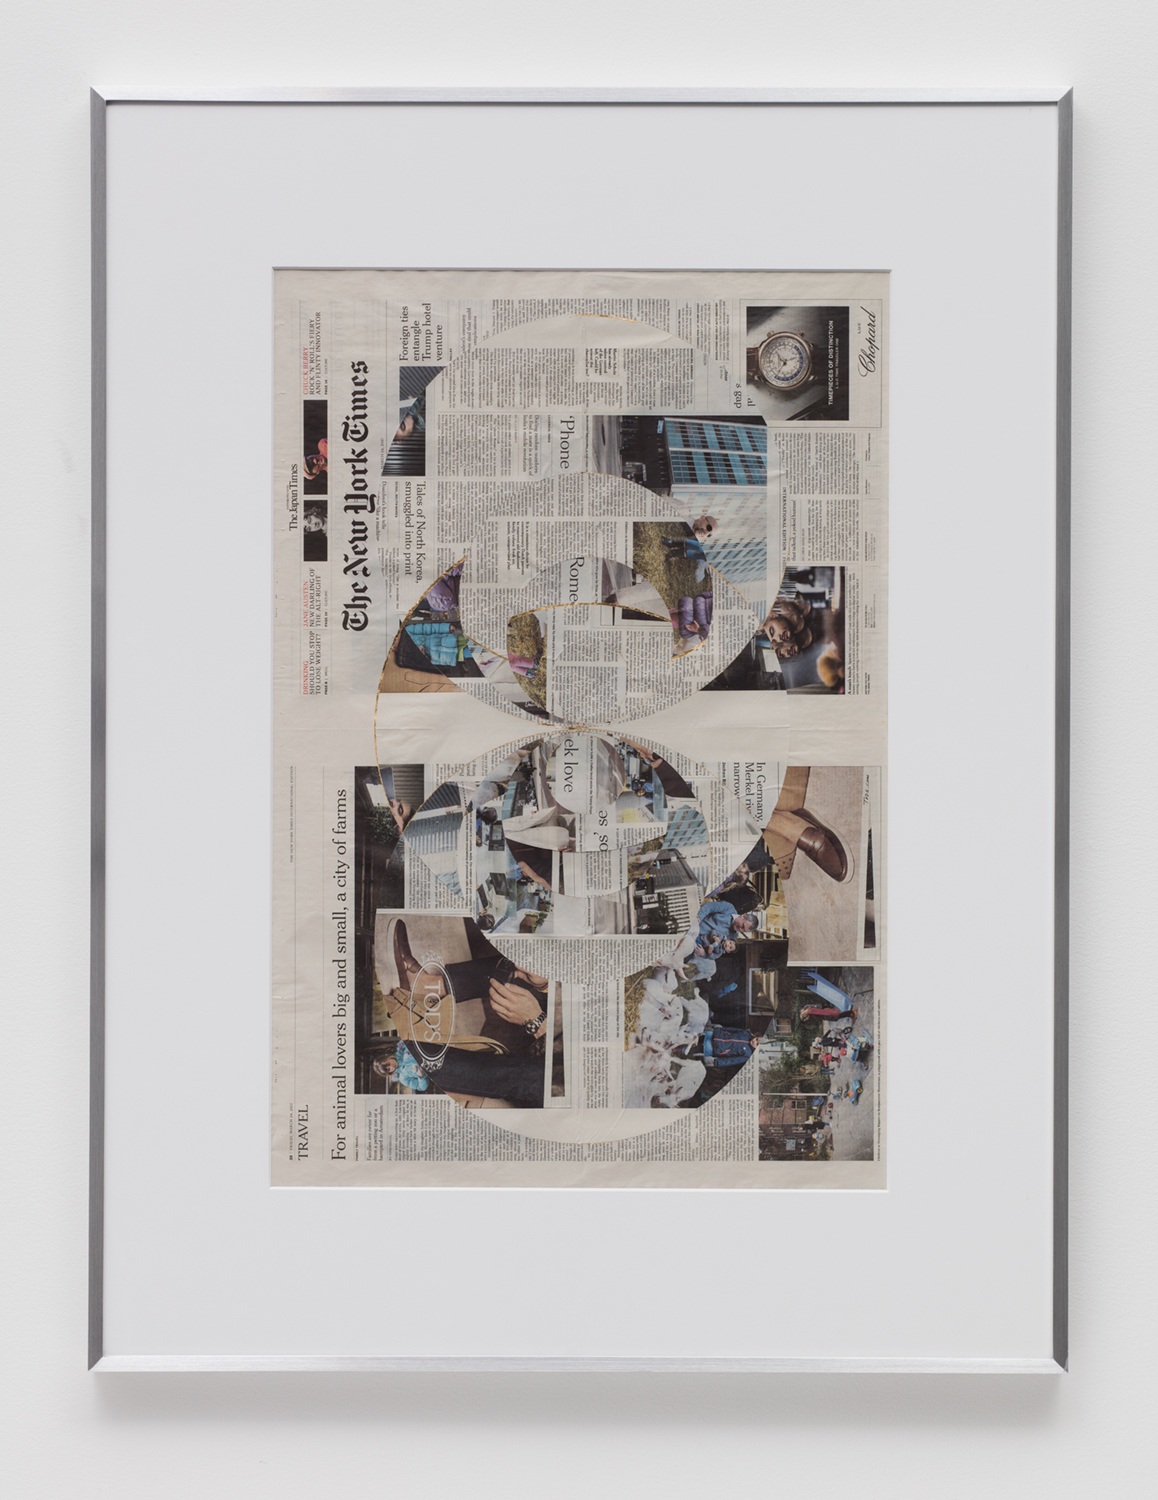   Blind Collage (Four 180º Rotations, The New York Times International Edition Distributed with The Japan Times, Friday, March 24, 2017)   2017  Newspaper, tape, and 22 karat gold leaf  43 5/8 x 33 1/8 inches   Blind Collages, 2017–   Exhibition:  Tr